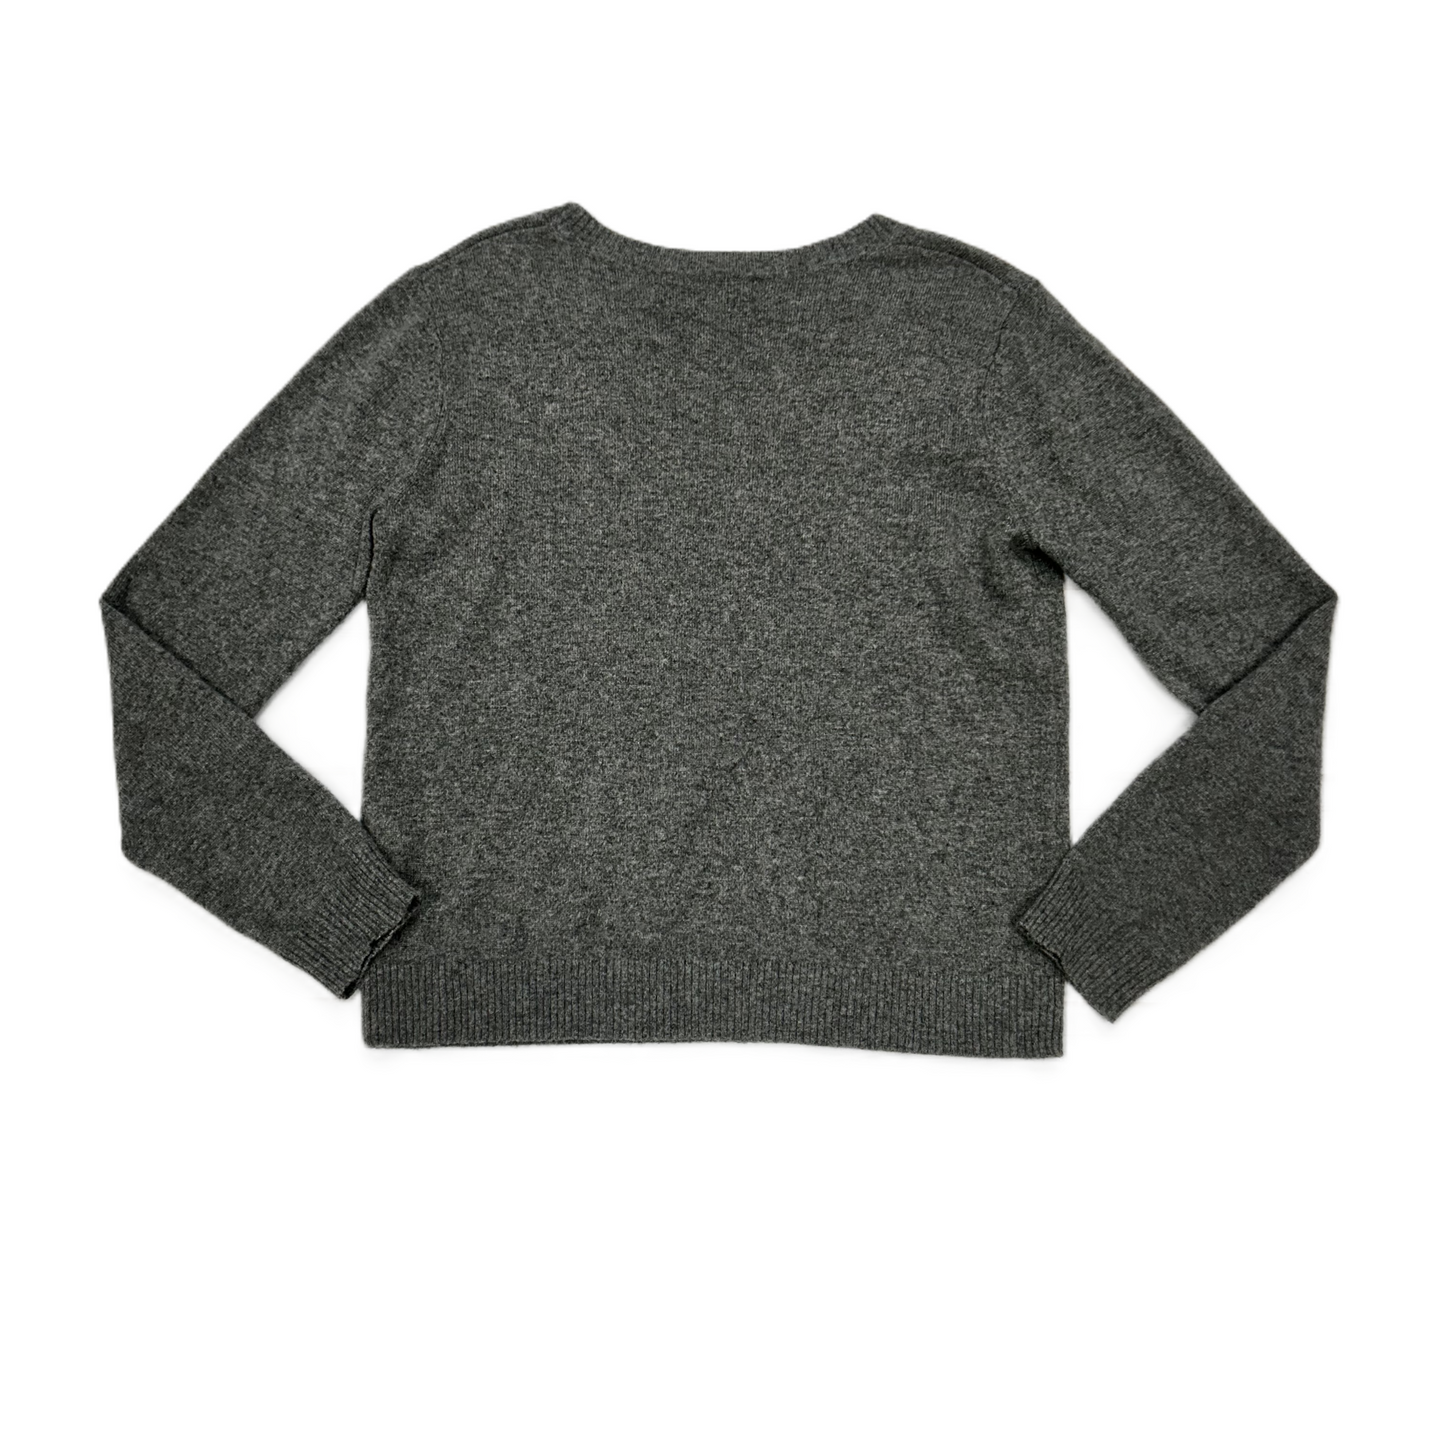 Grey Sweater Designer By Milly, Size: S